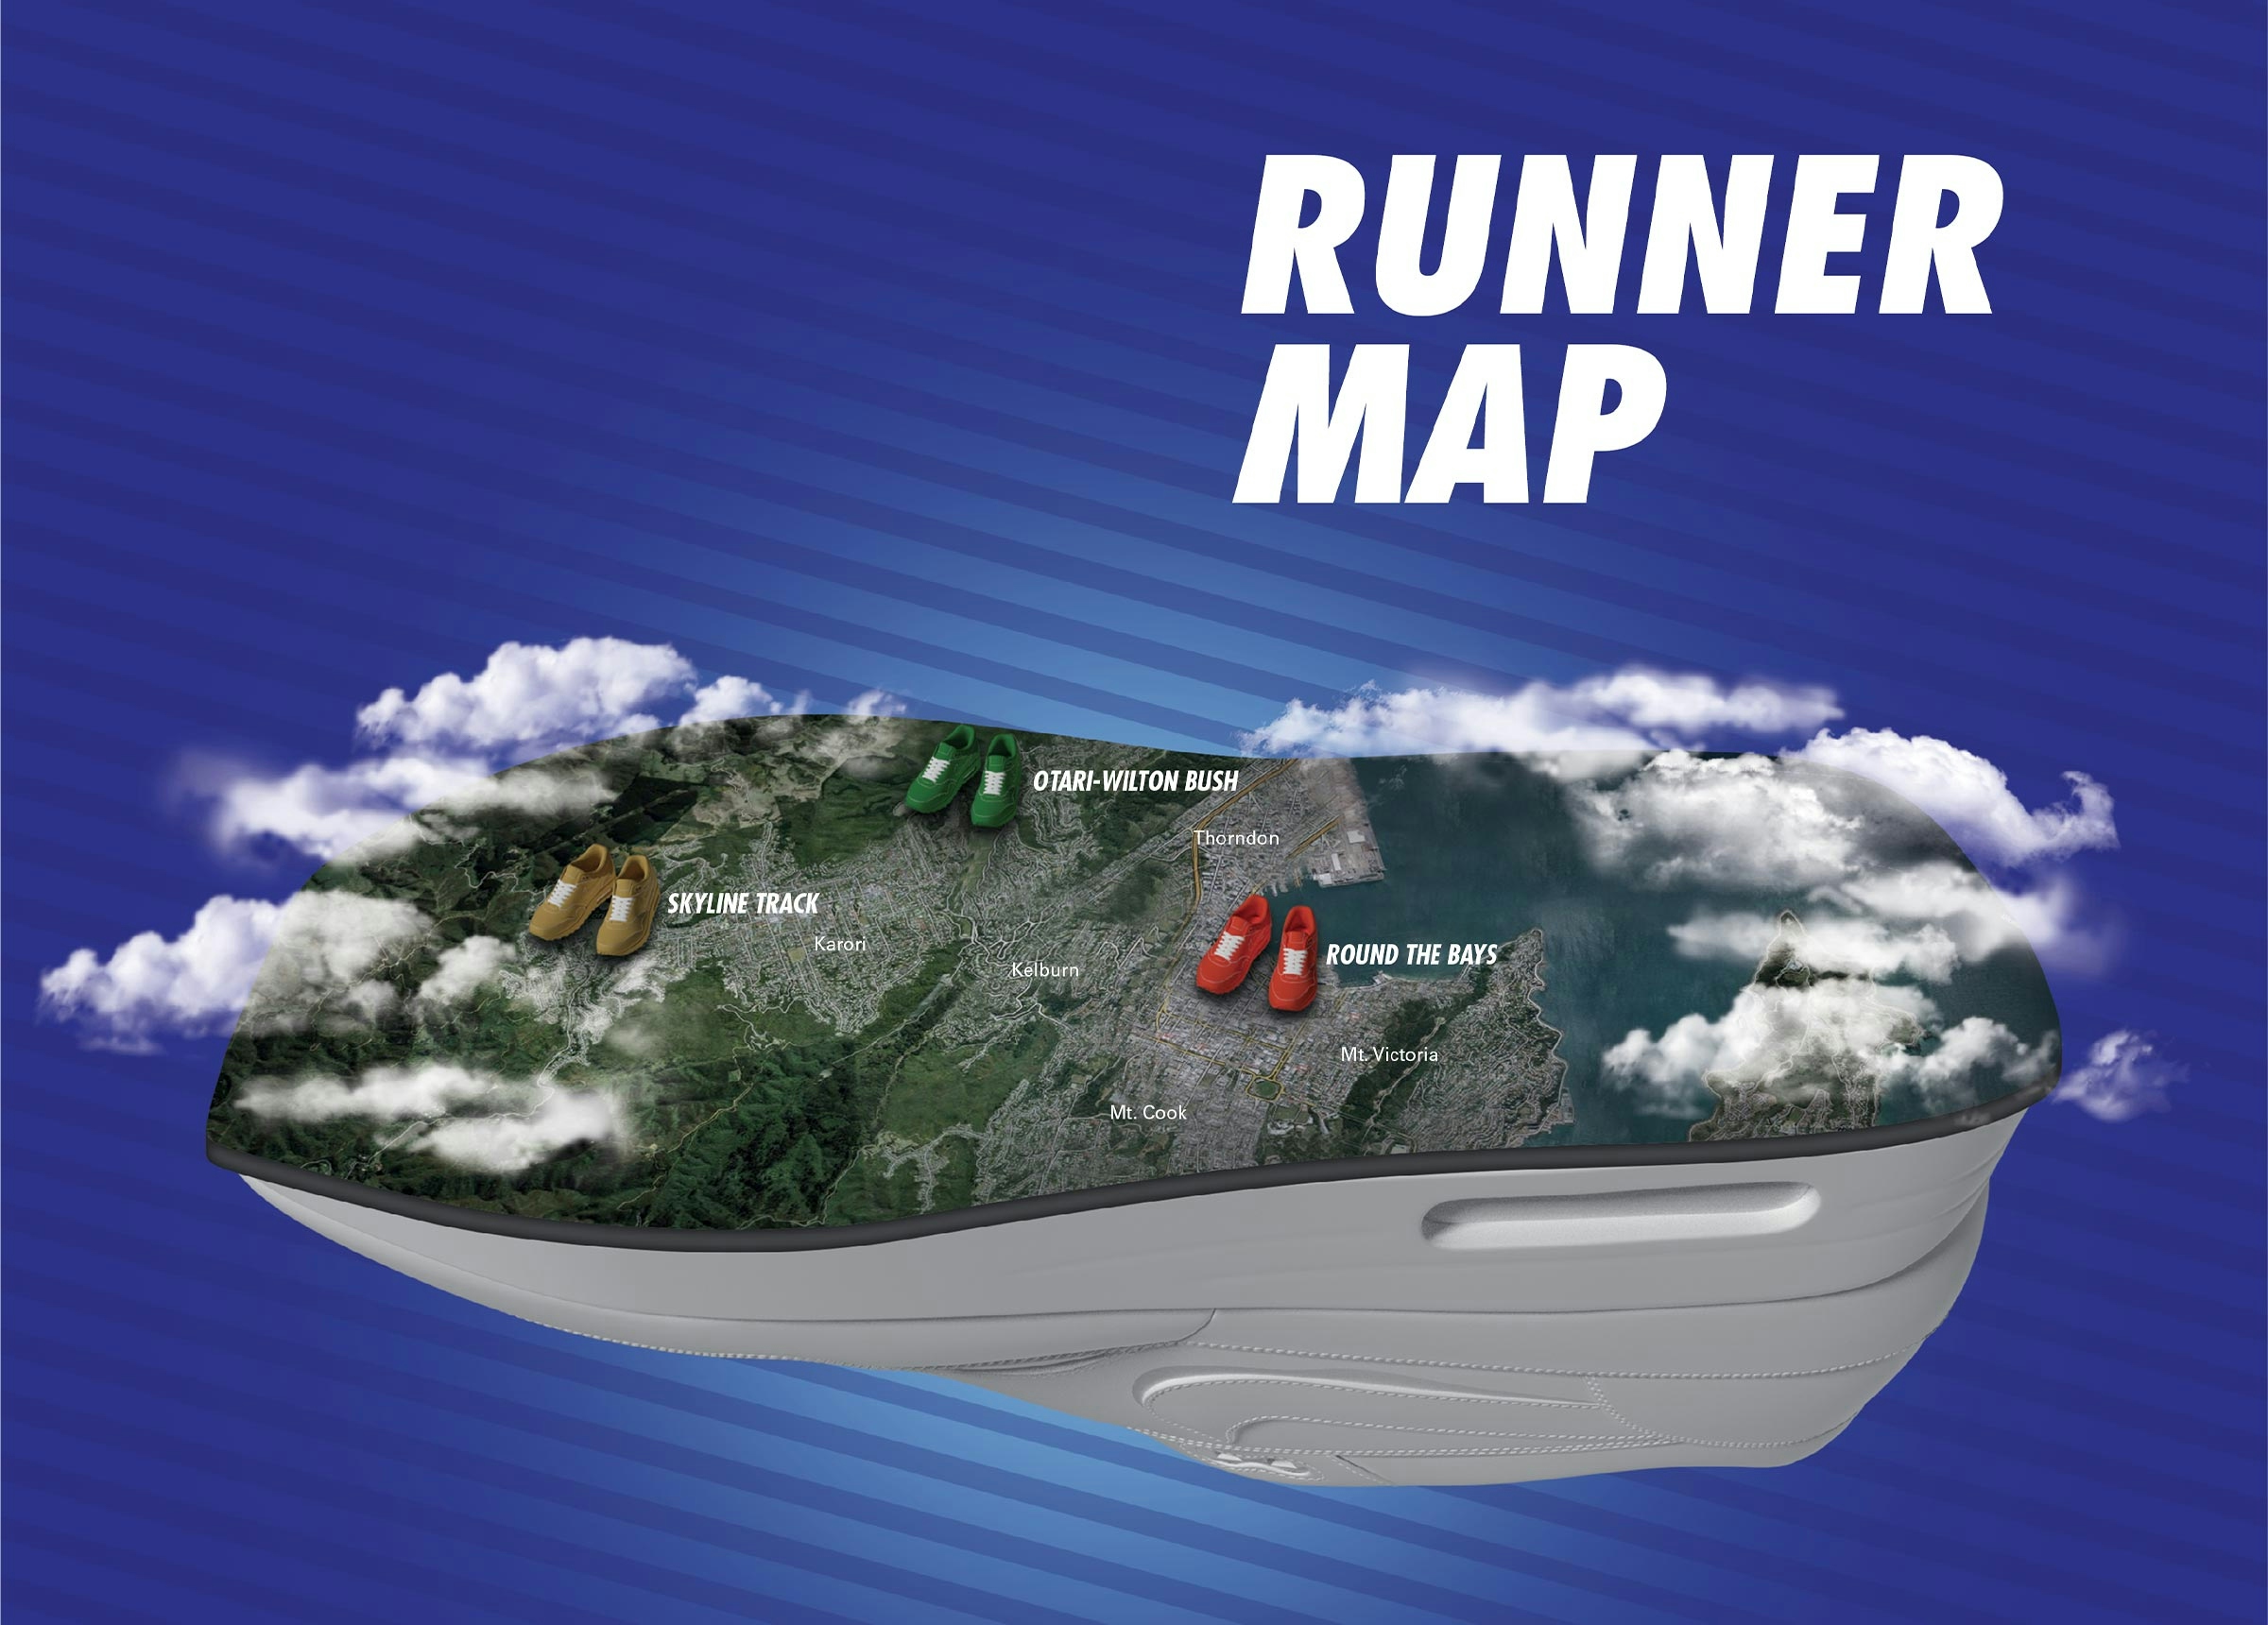 Runners map, showing an overview of where to find each track